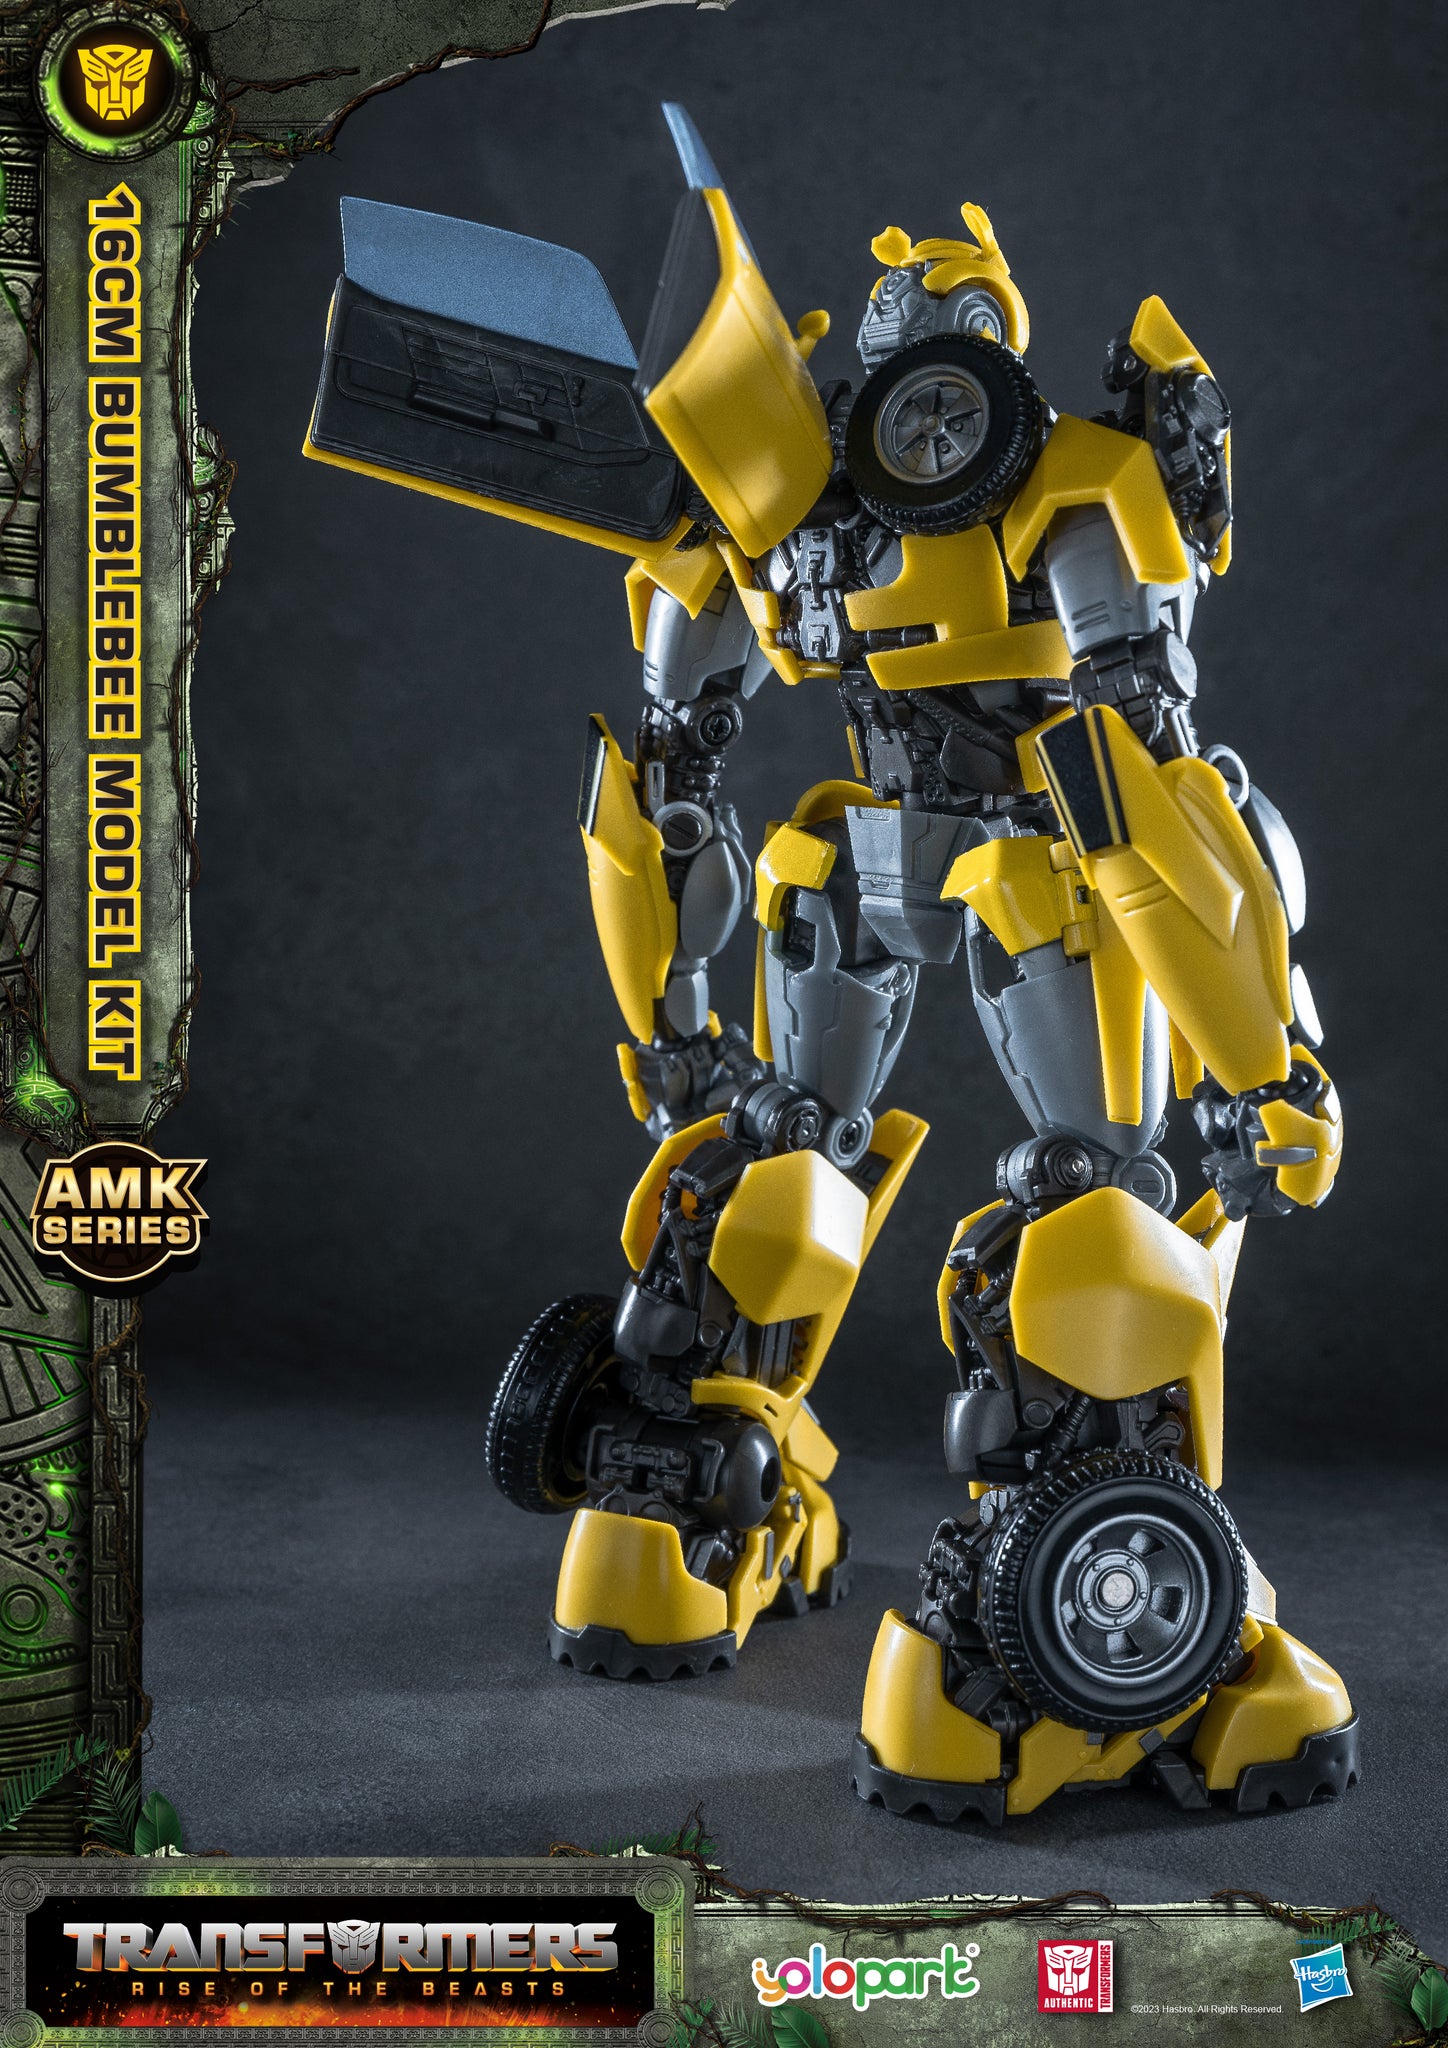 YOLOPARK Bumblebee Transformers Toy Model Kit｜Transformers The